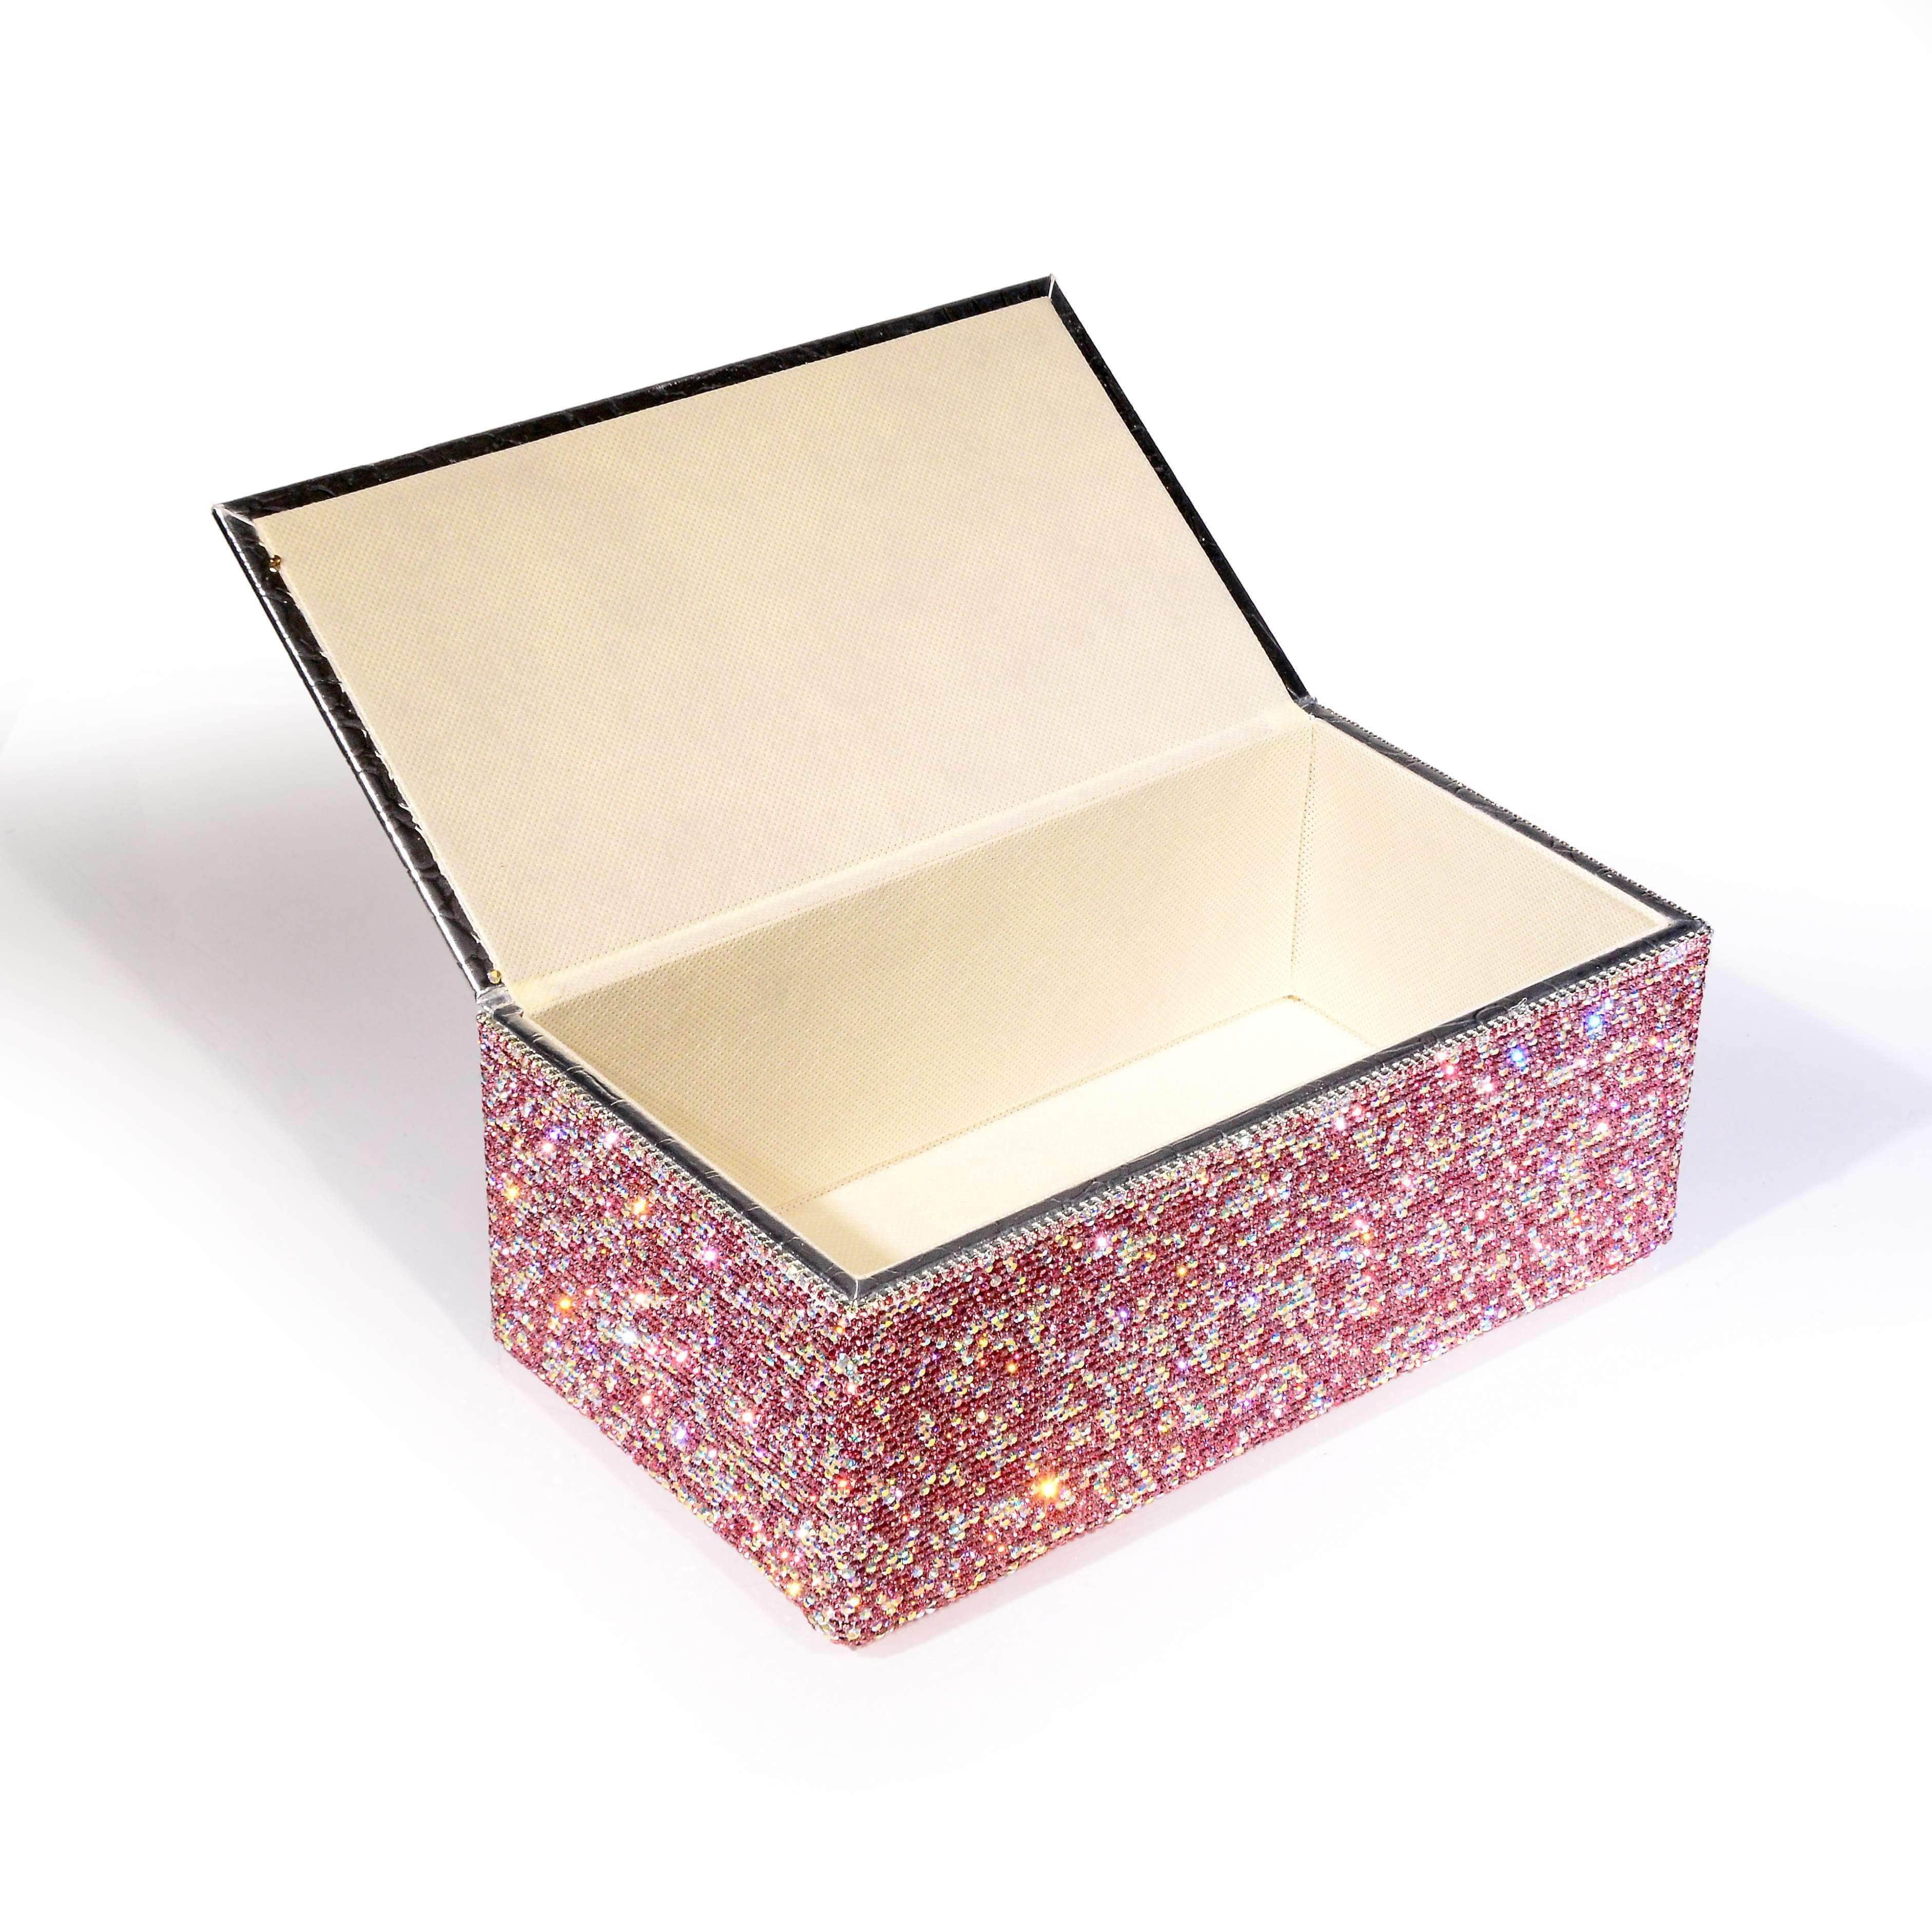 STB400-PK - Tissue Box made w/ Pink Crystals